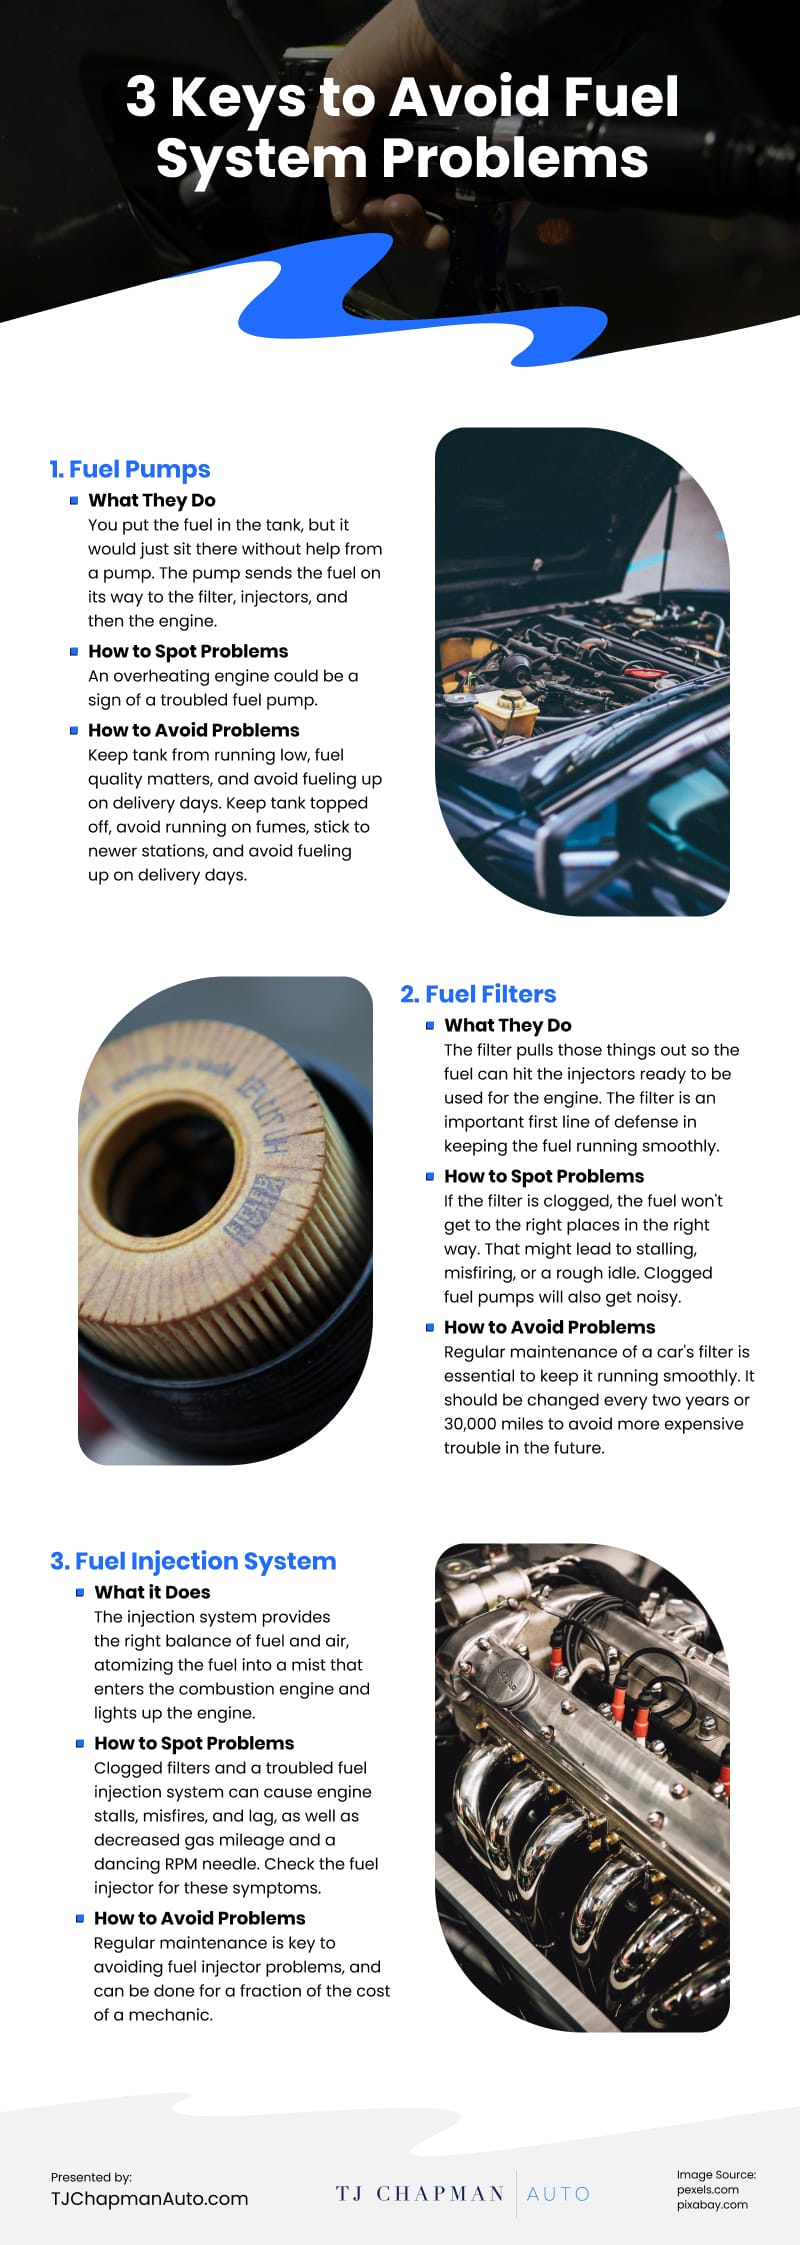 3 Keys to Avoid Fuel System Problems Infographic